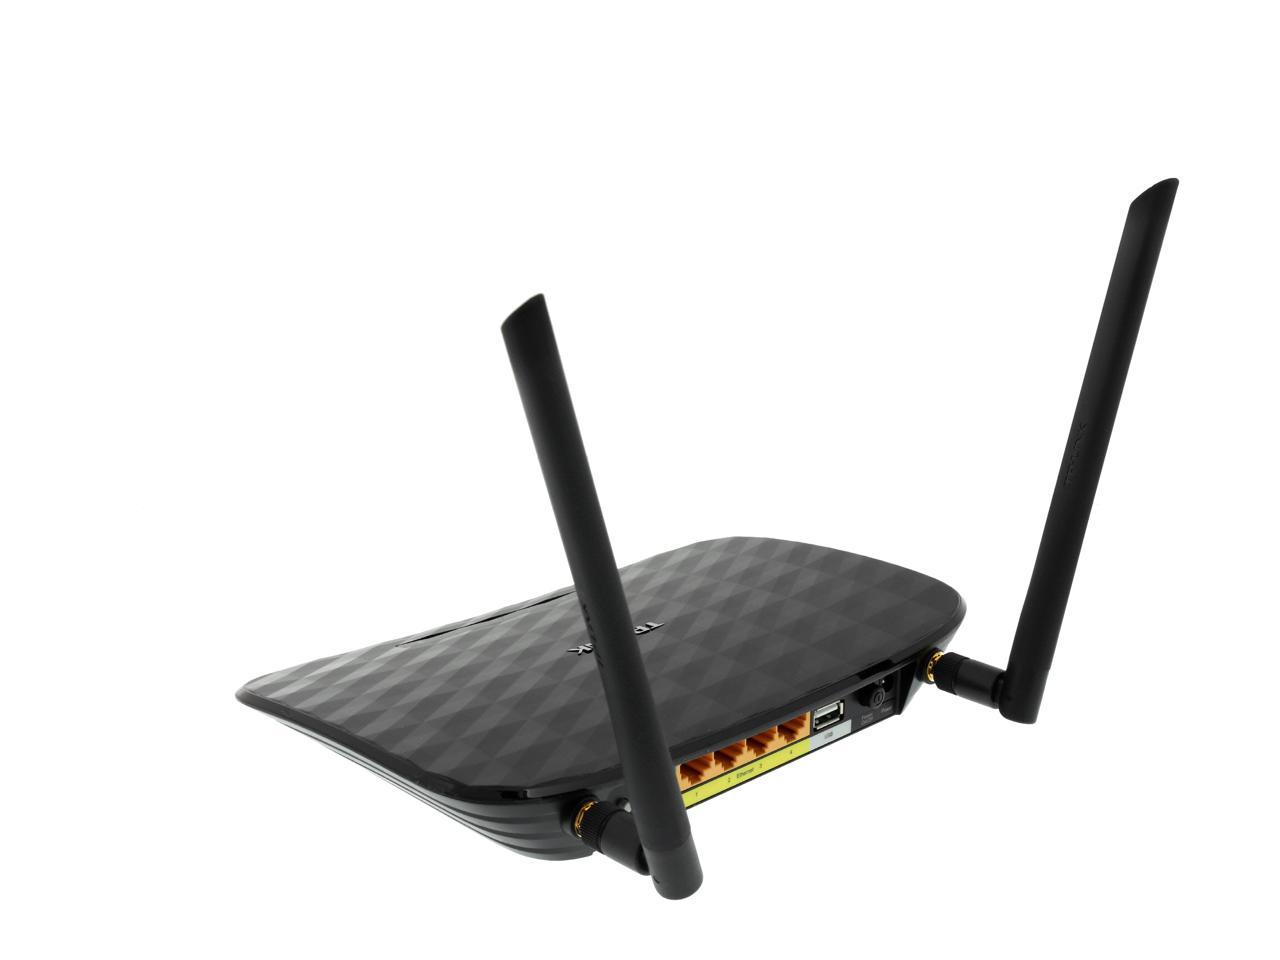 with time driver Manchuria TP-Link Archer C2 AC750 Wireless Dual Band Gigabit Router - Newegg.com